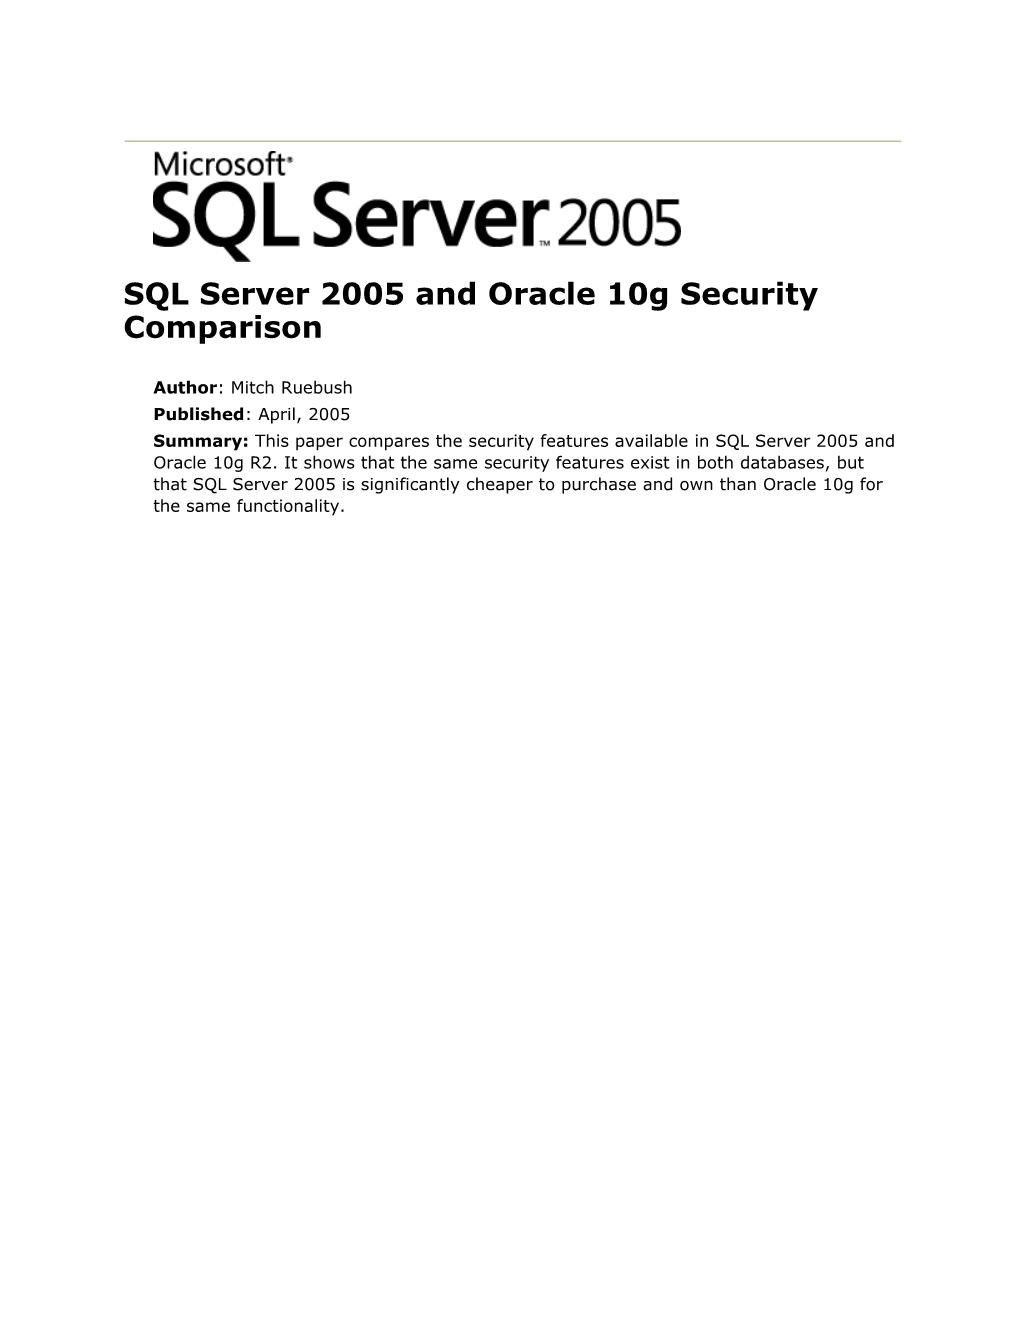 SQL Server 2005 and Oracle 10G Security Comparison